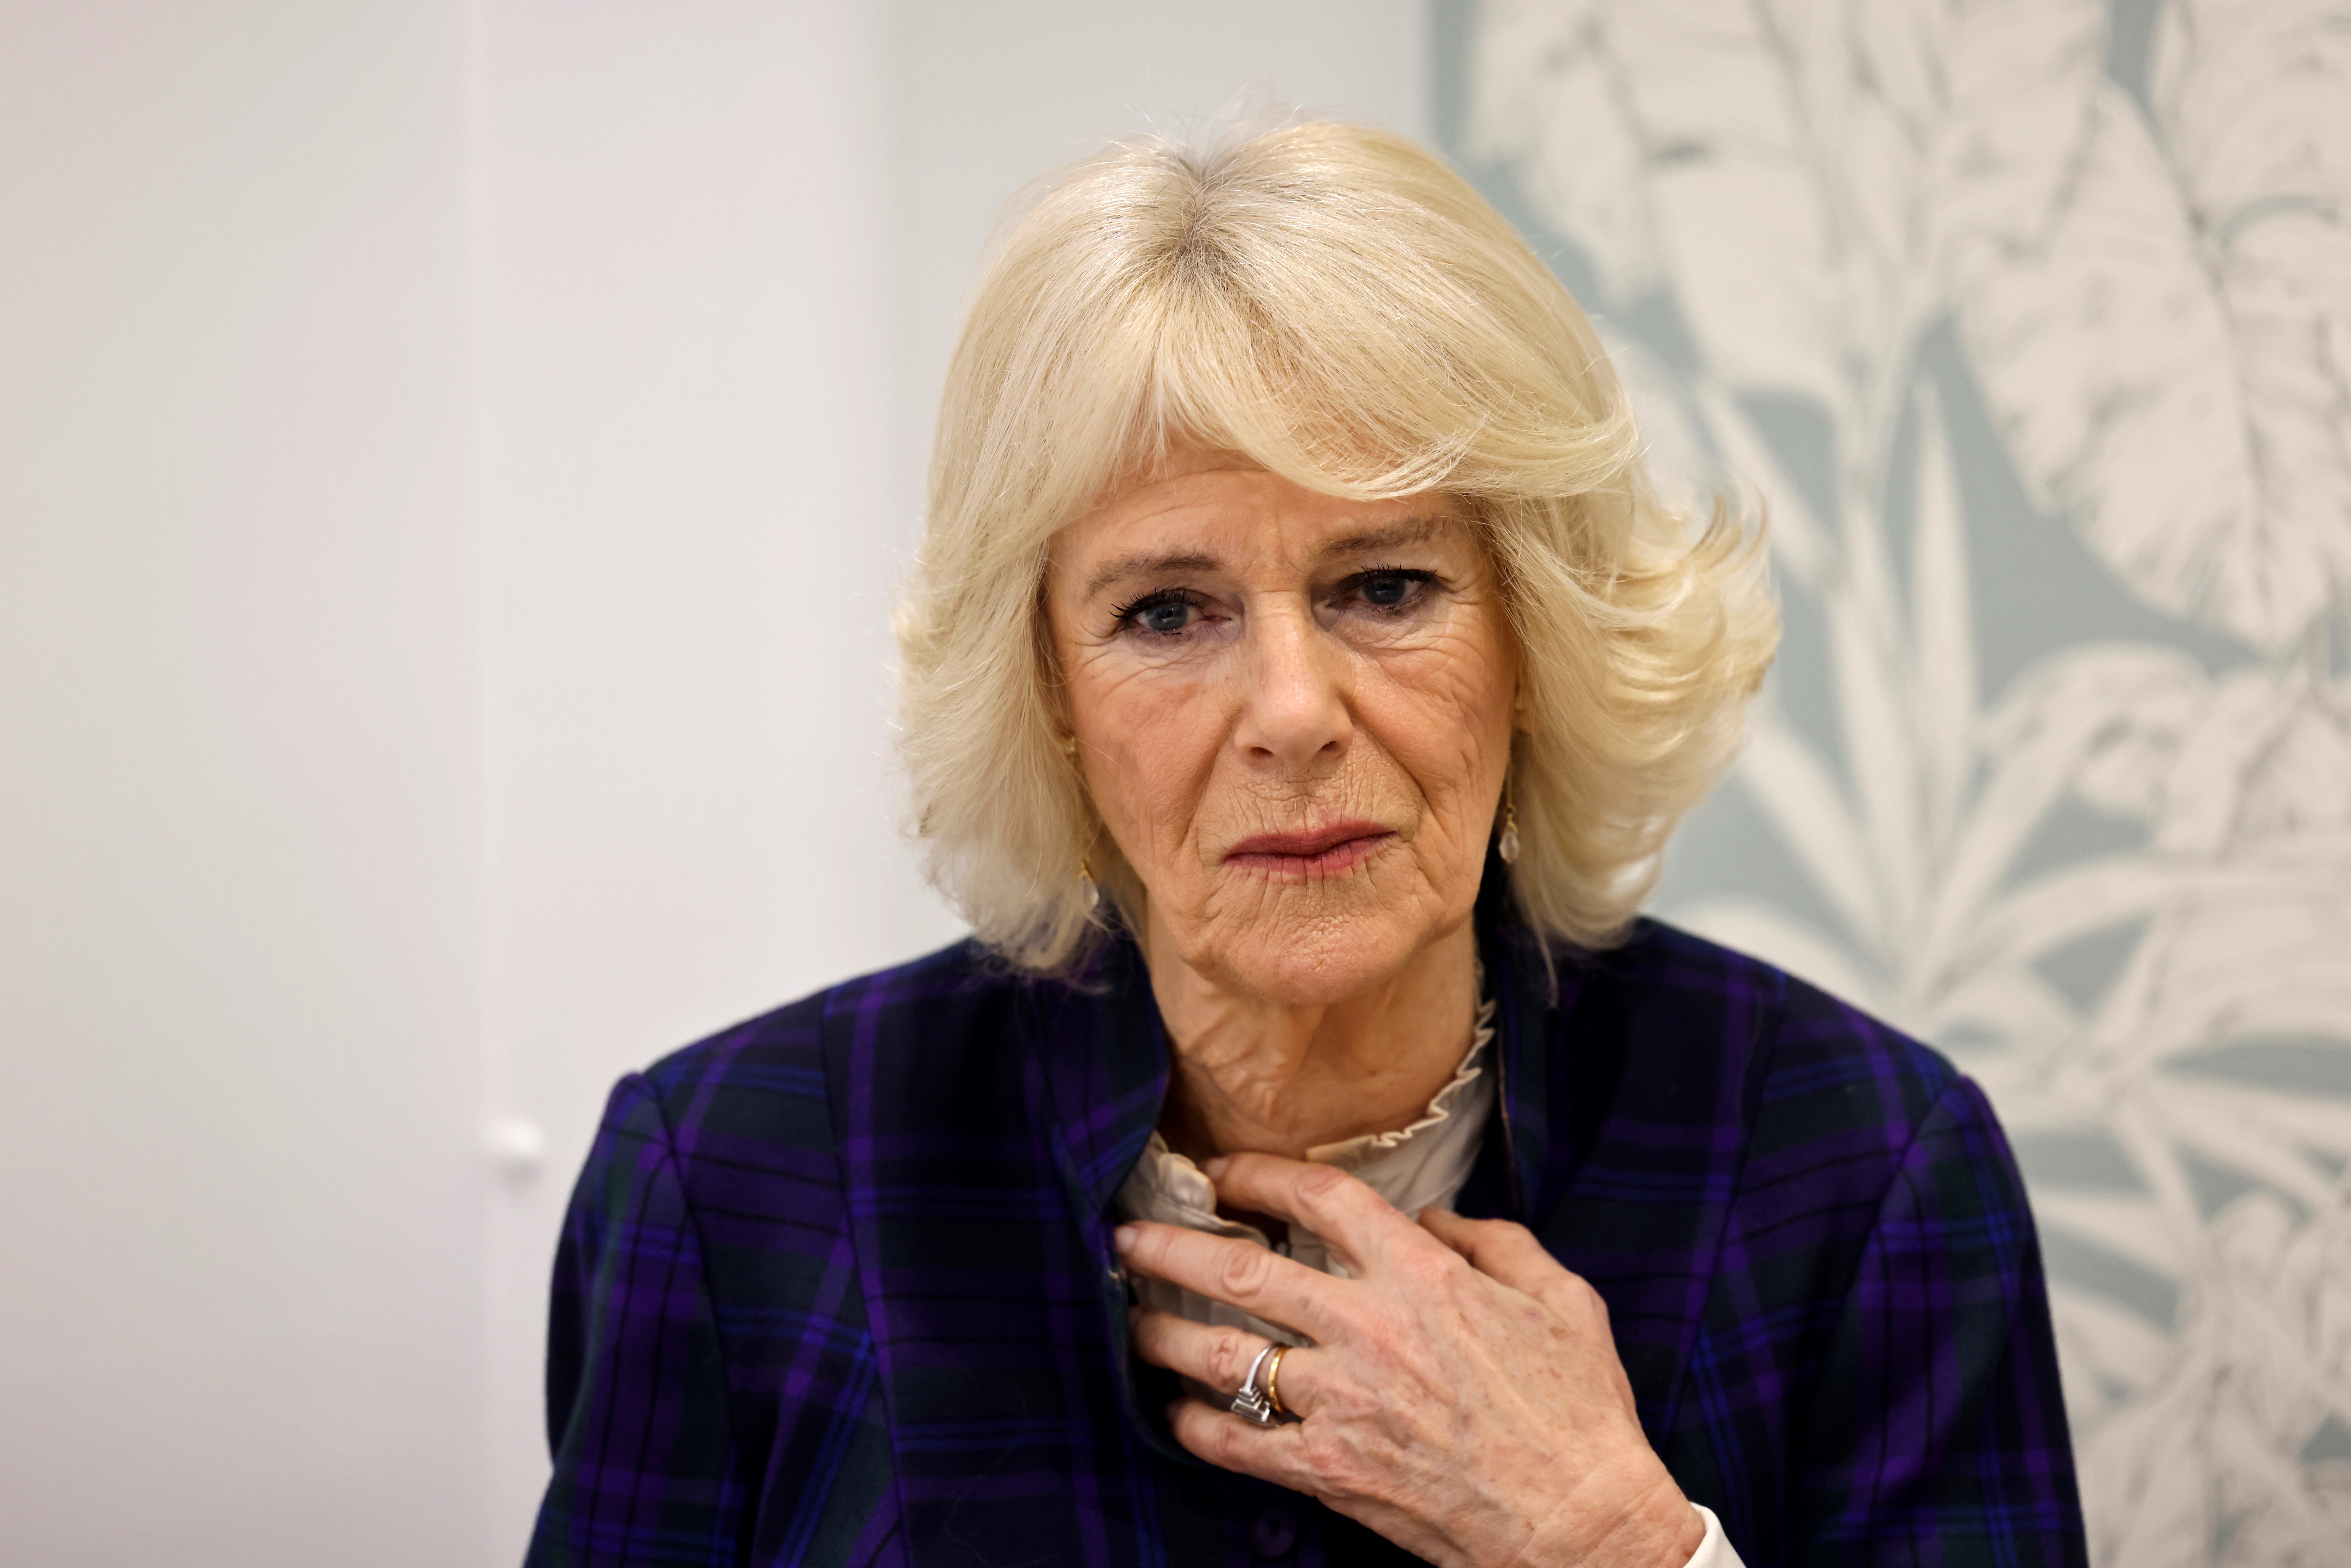 Queen Camilla during a visit to the clinic Paddington Haven in London, England on February 10, 2022 | Source: Getty Images